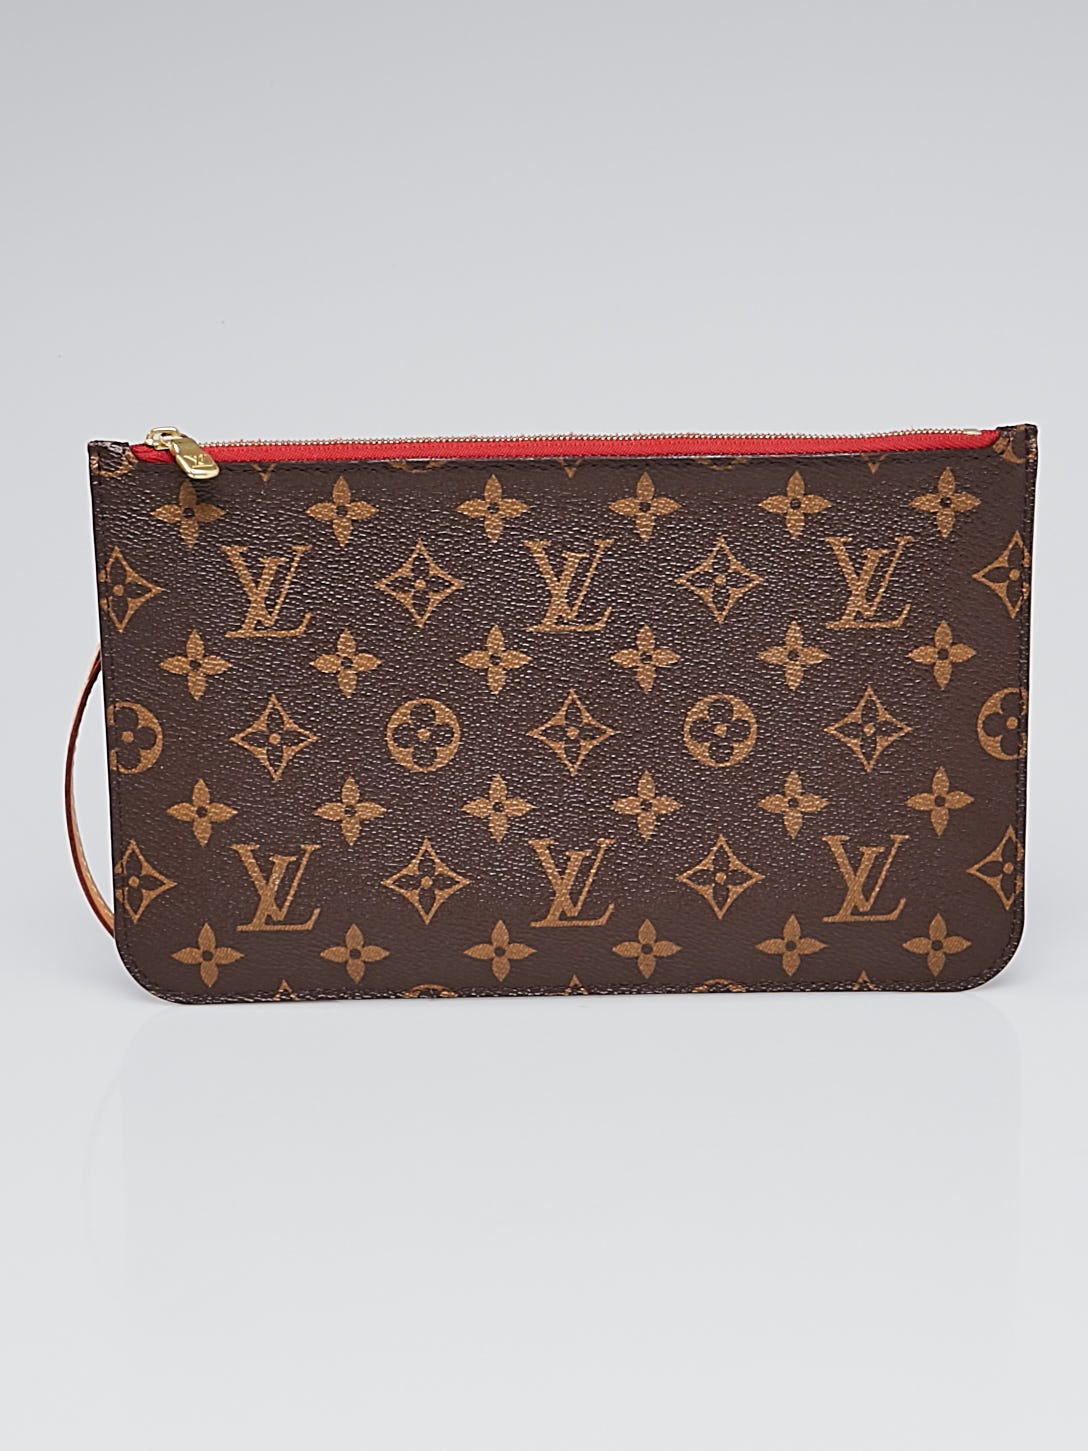 Louis Vuitton - Authenticated Clutch Bag - Leather Brown for Women, Never Worn